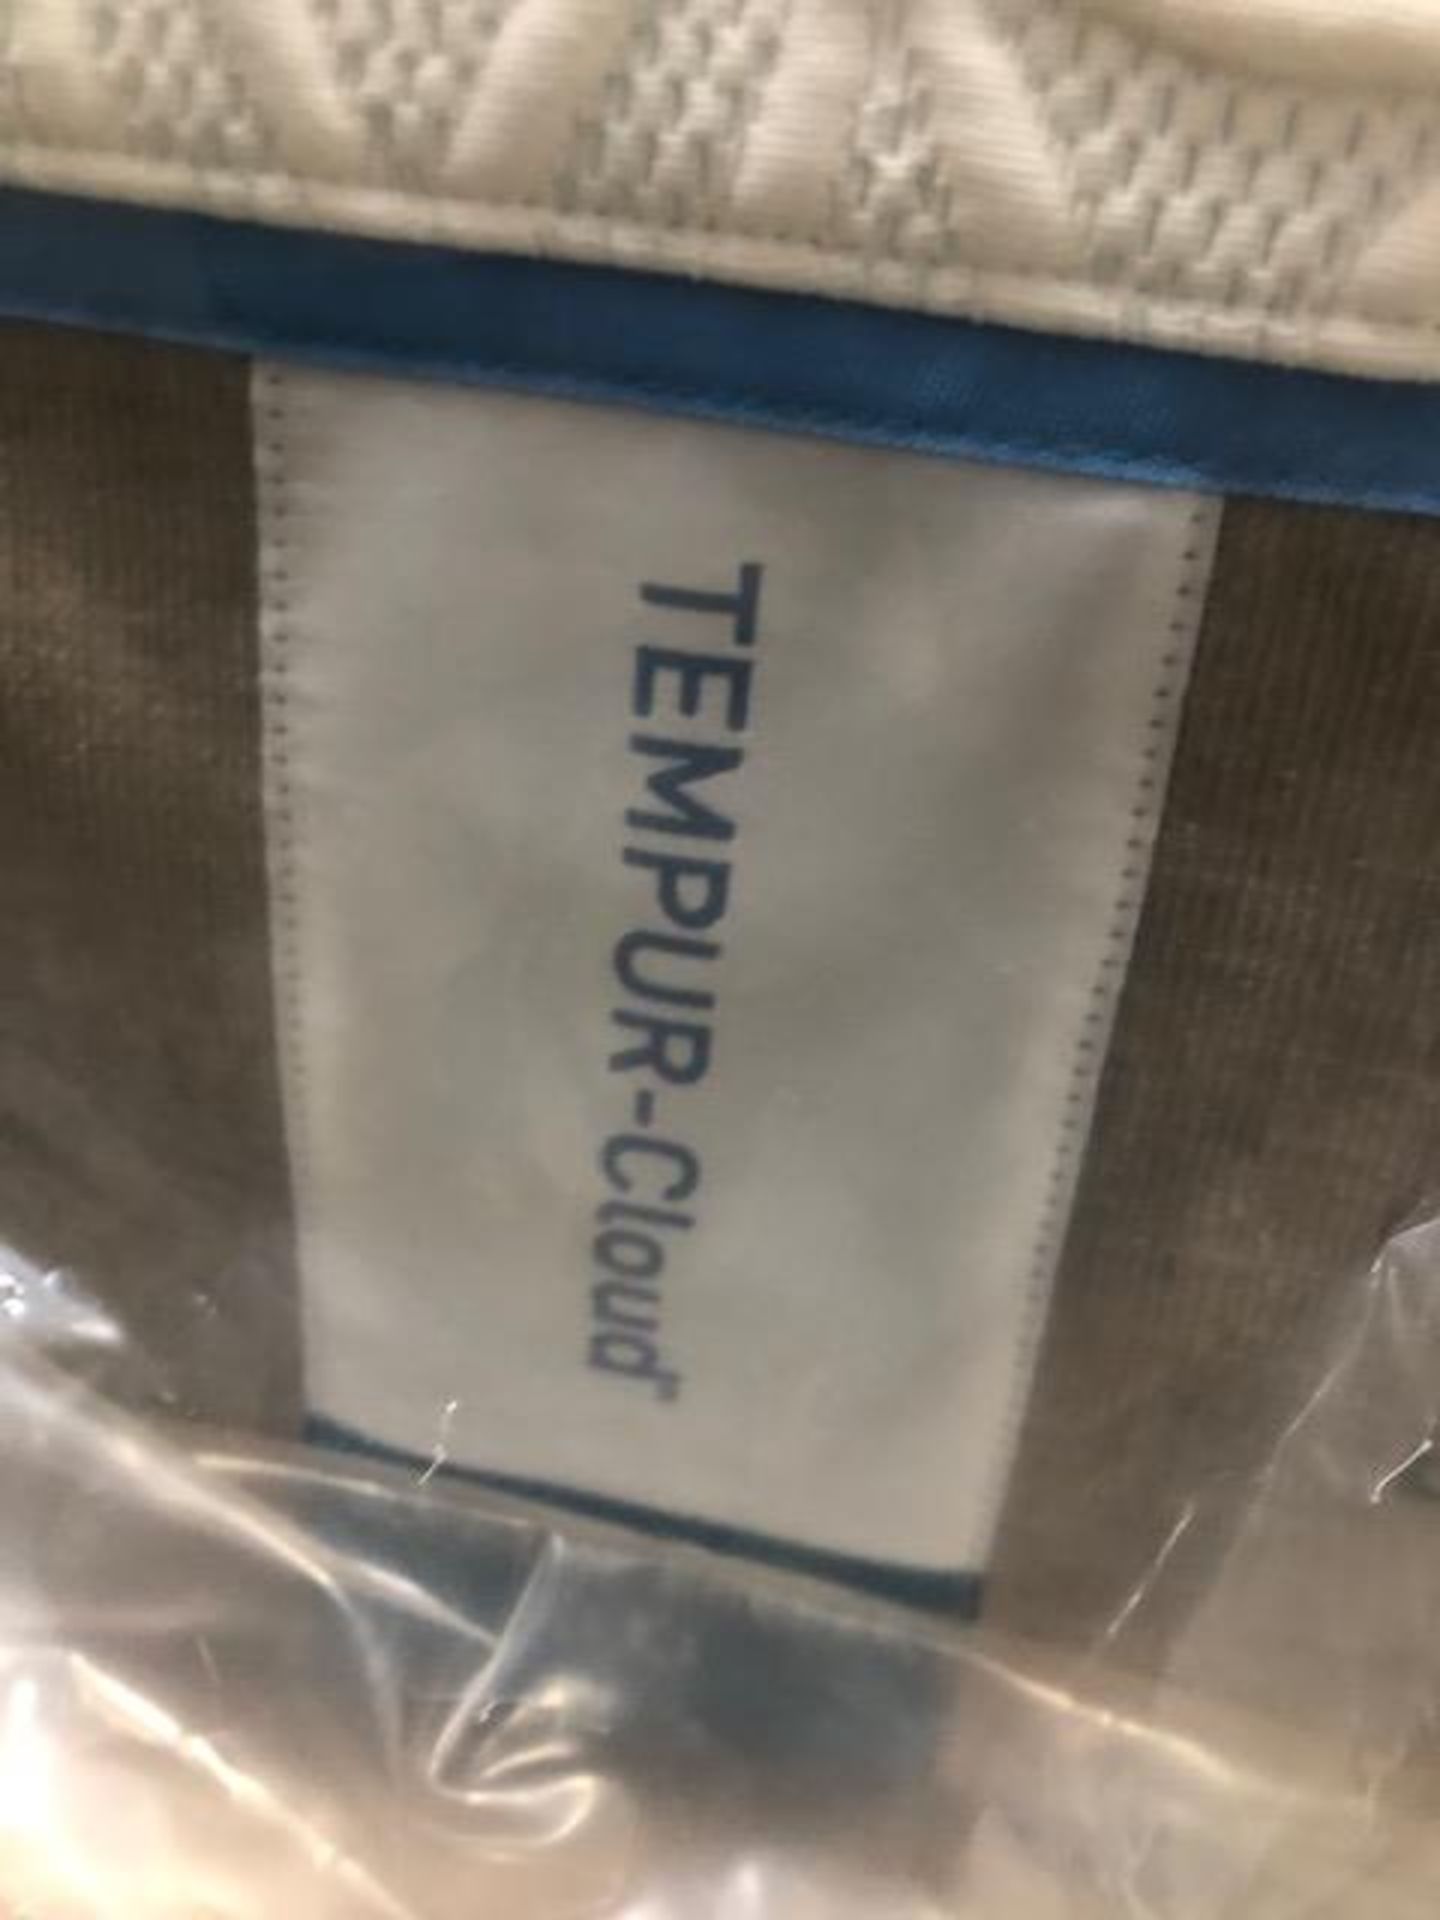 TEMPUR-PEDIC TWIN XL MATTRESS WITH FOUNDATION - Image 2 of 4